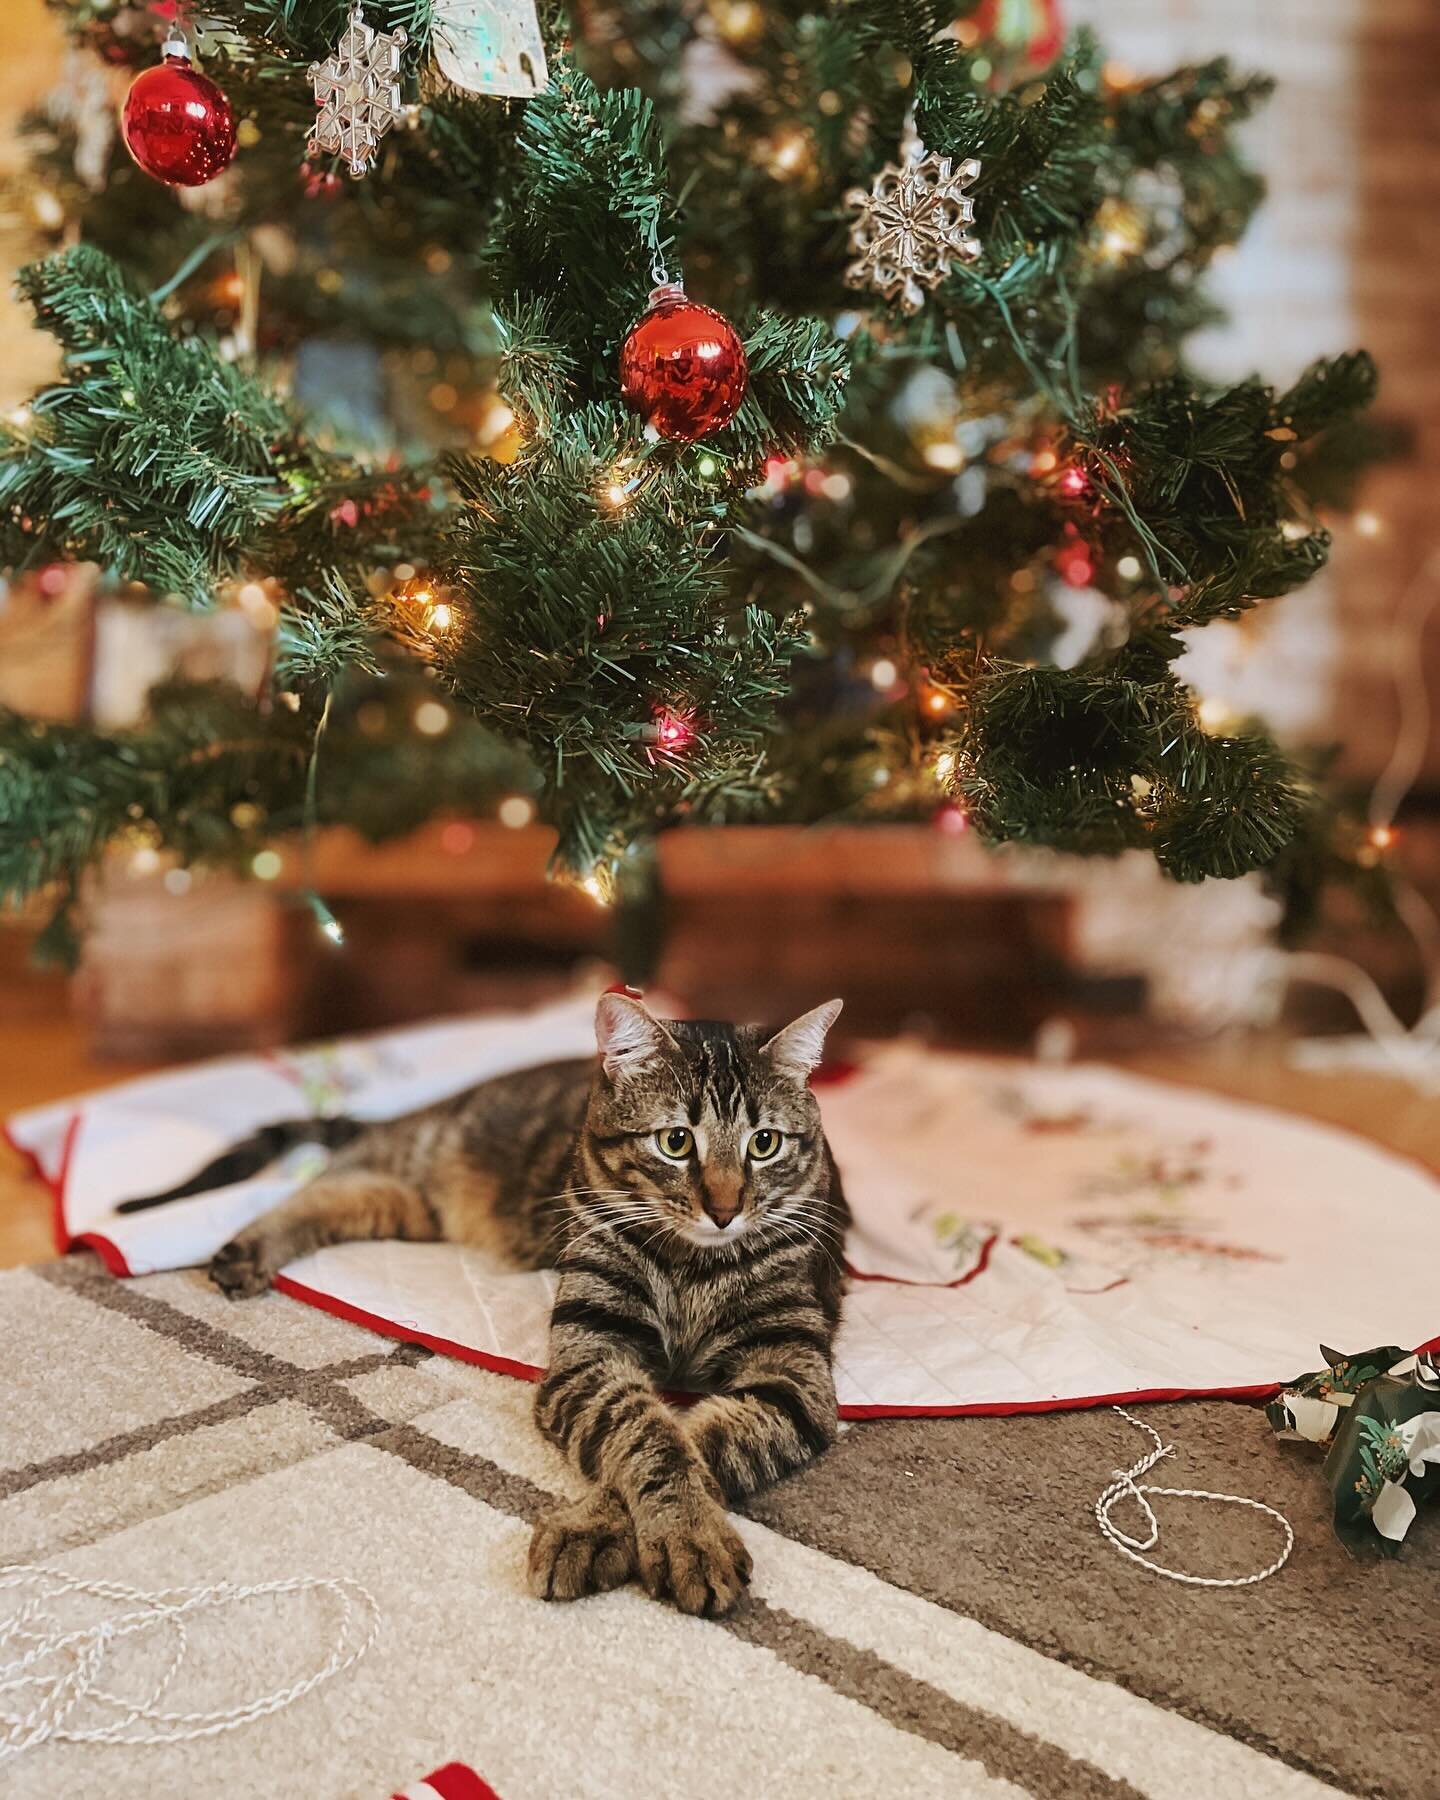 Jimmy says, job well done at Christmas this year 😻Happy holidays everyone!